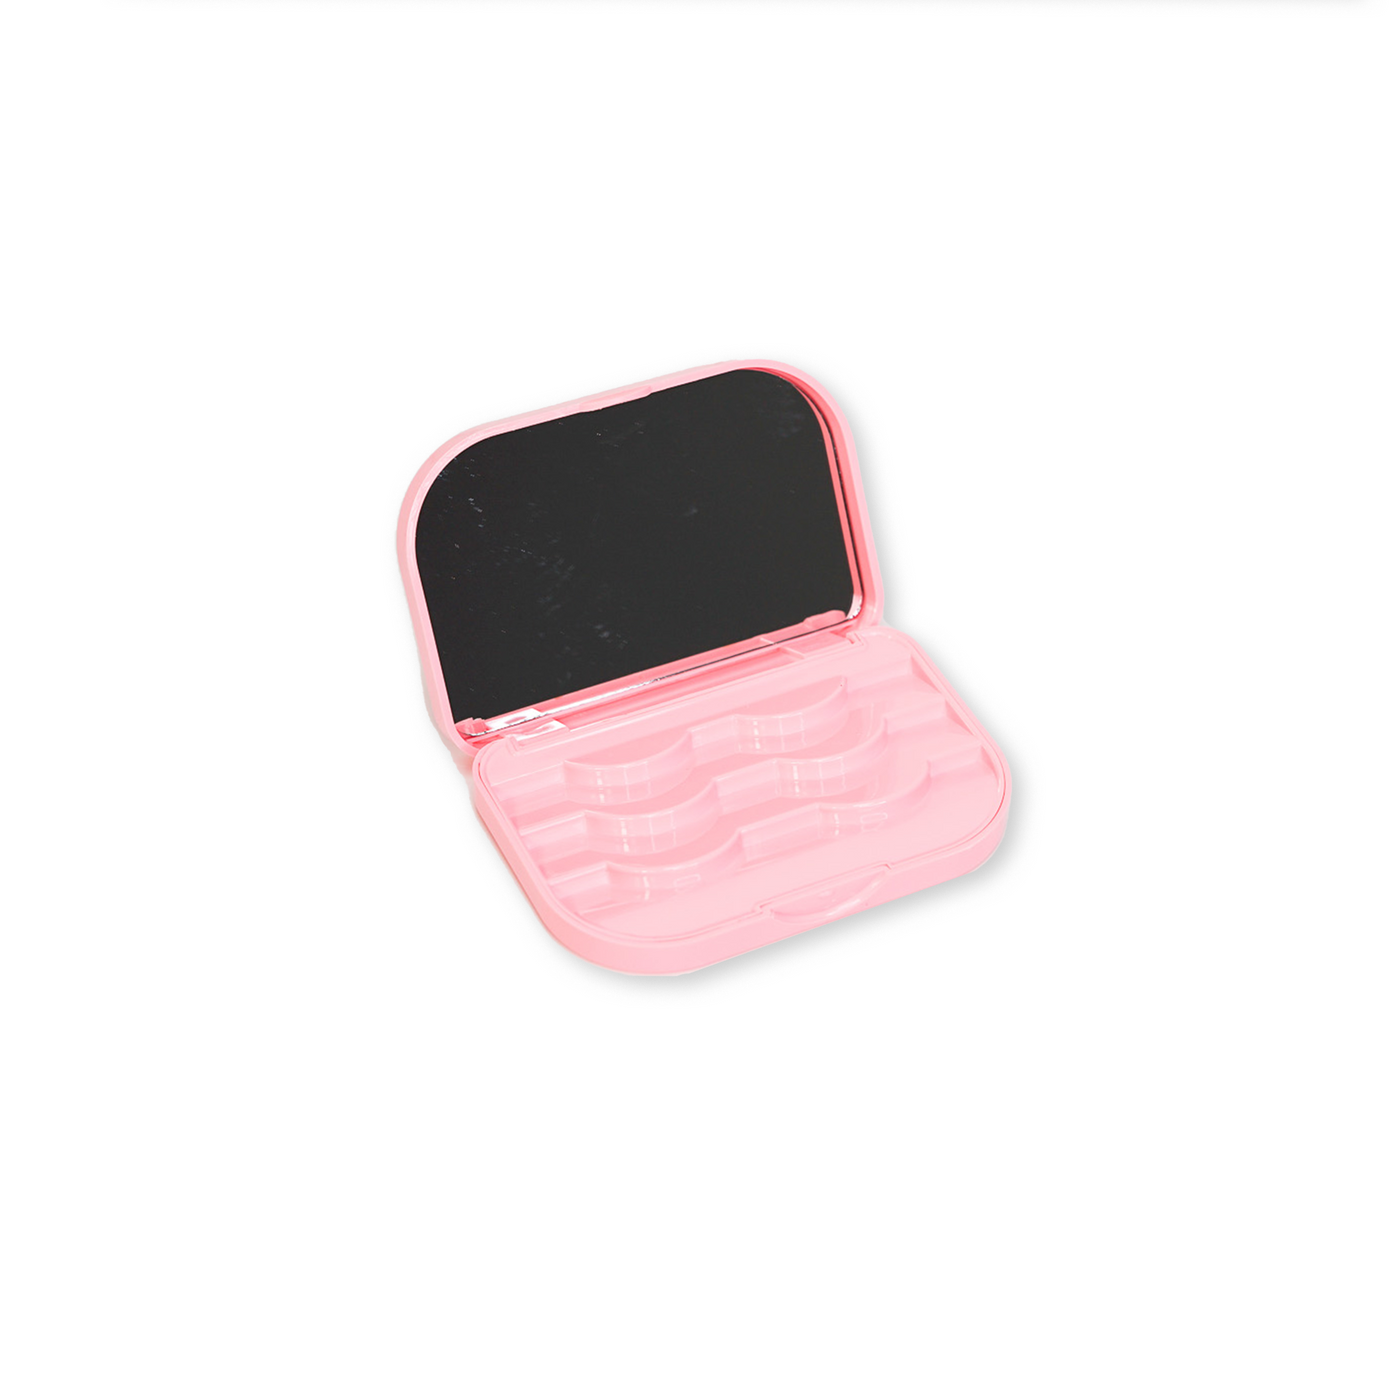 Beauty Keeper Square Storage Box For Transparent Face Masks, Puffs, Lashes,  And Cards Compact, Durable, And Versatile. From Parklondon, $0.83